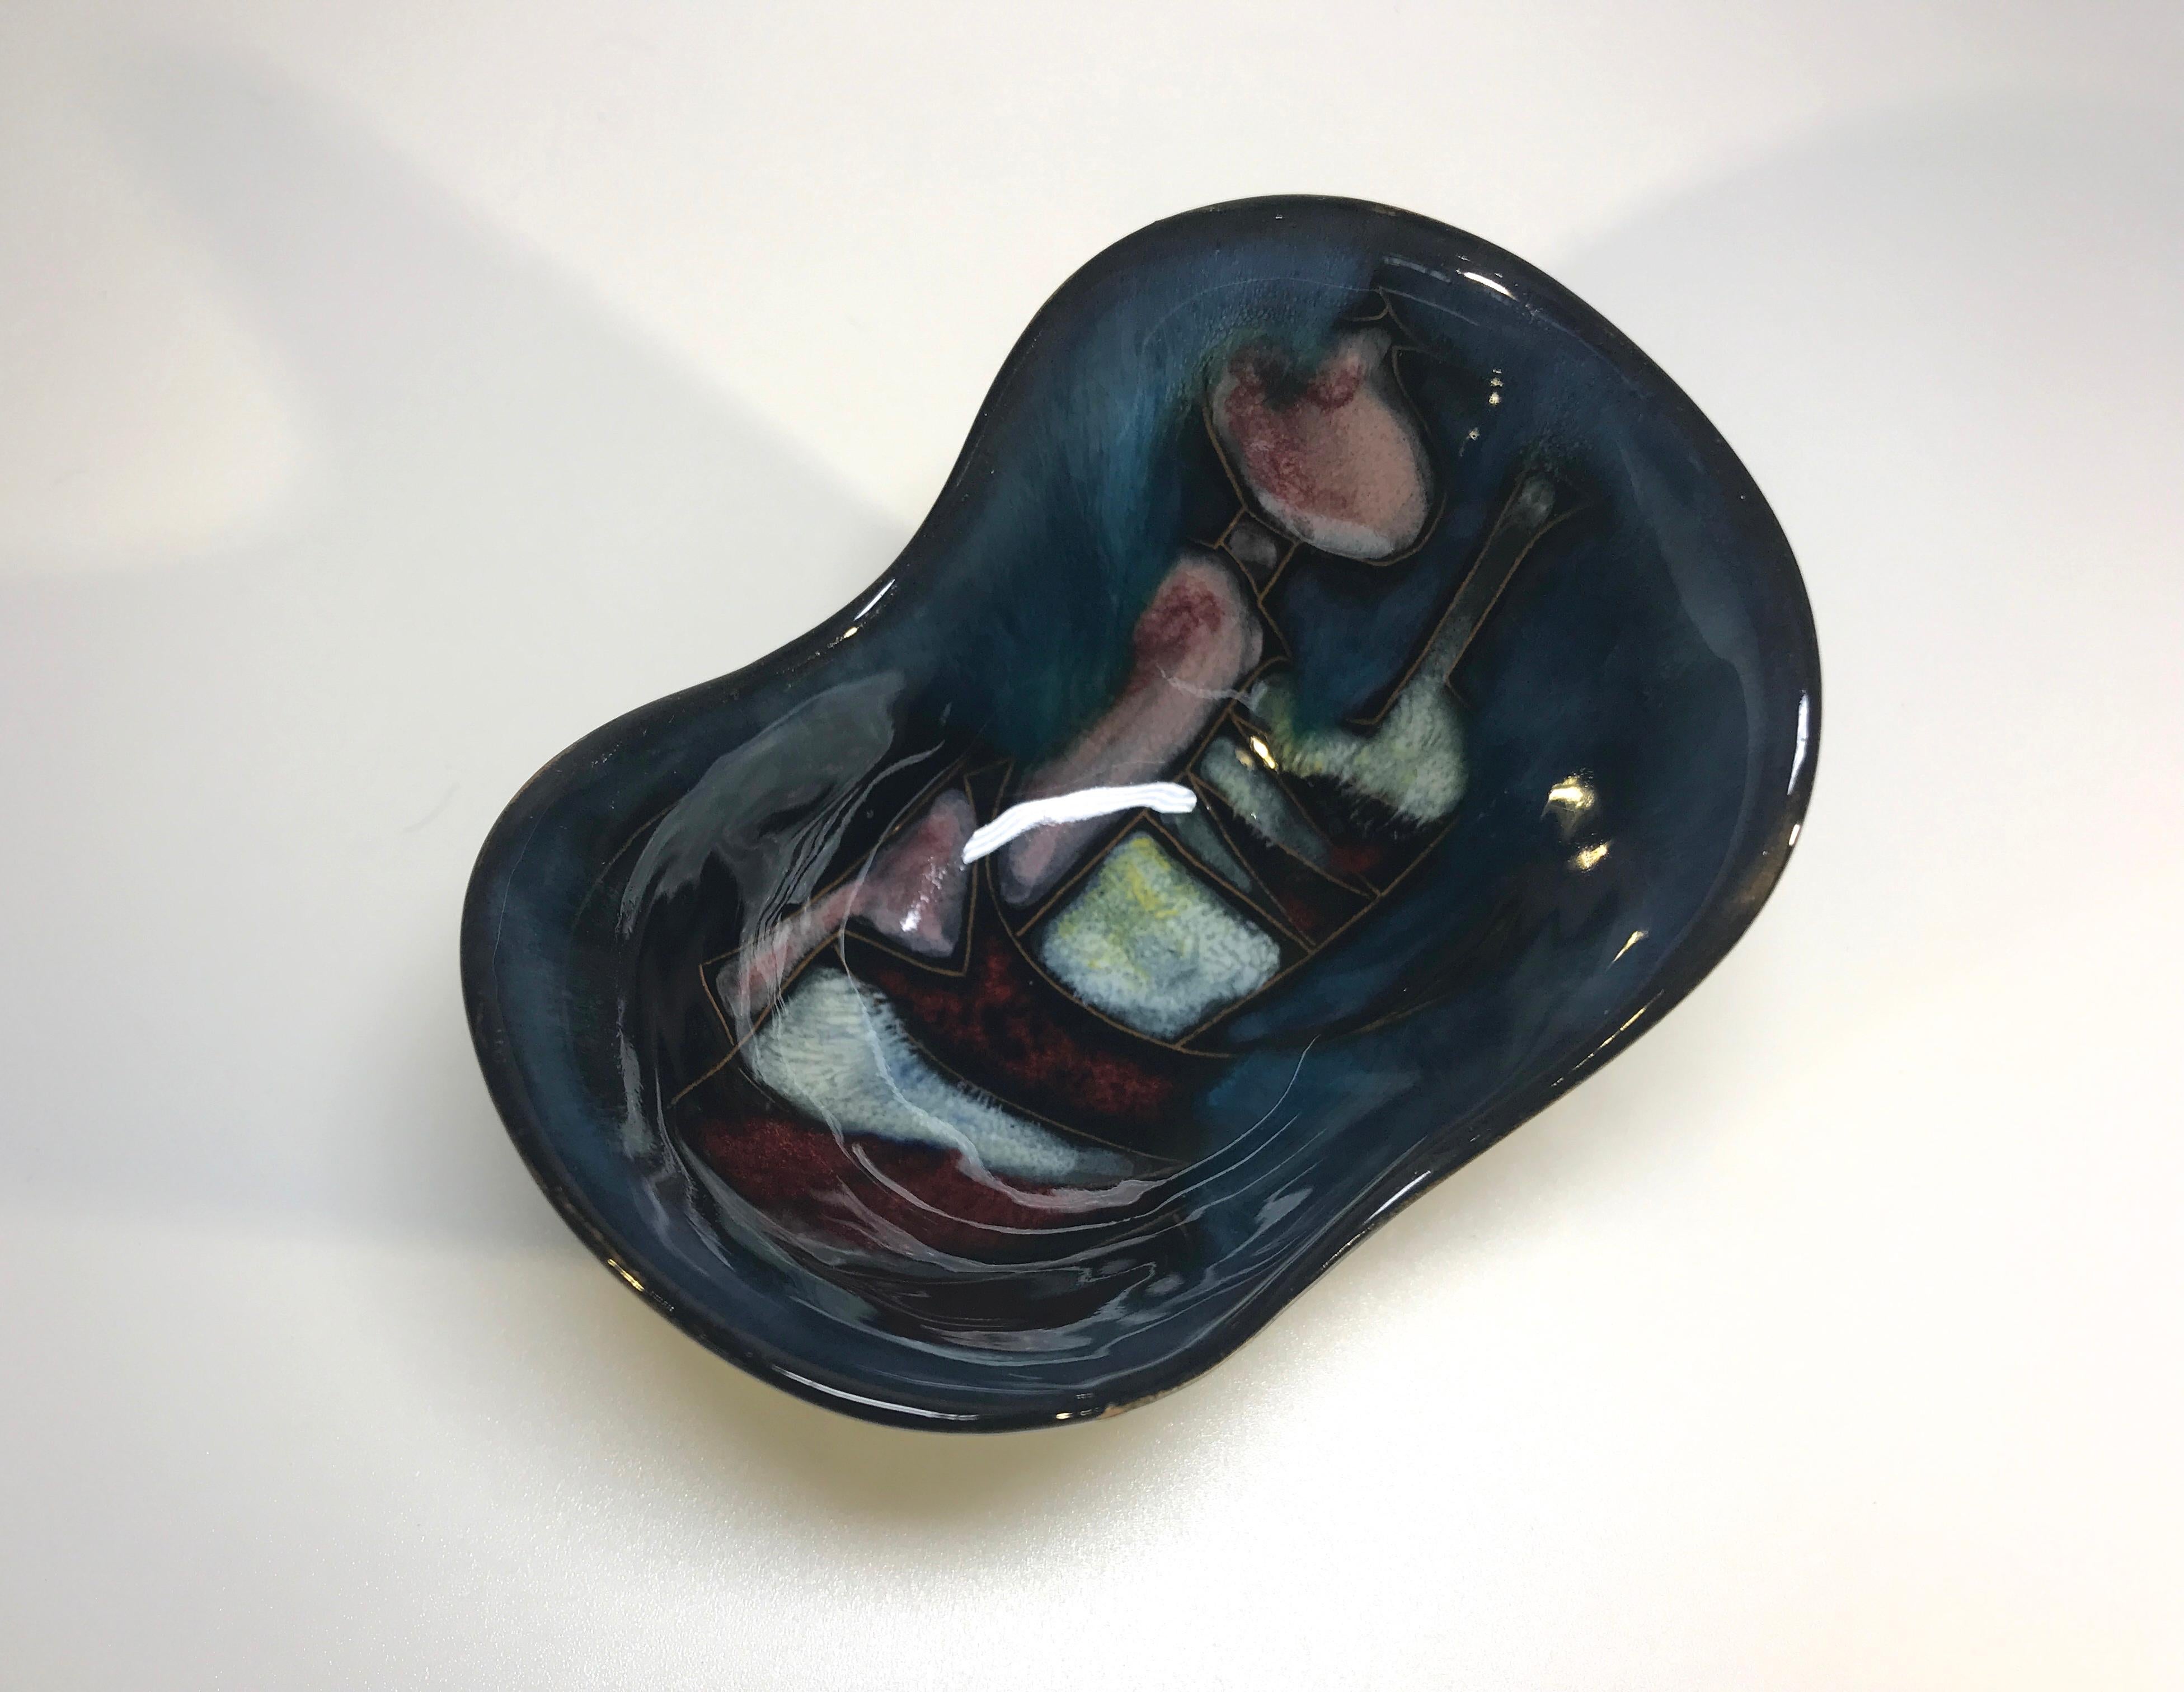 Artistic Batignani of Florence, ceramic hand painted, abstract miniature vide-poche
Superbly rich in color and glaze, a super little piece
Signed Batignani, Italy,
circa 1950s
Measures: Height 2 inch, width 2 inch, depth 3.5 inch
In excellent